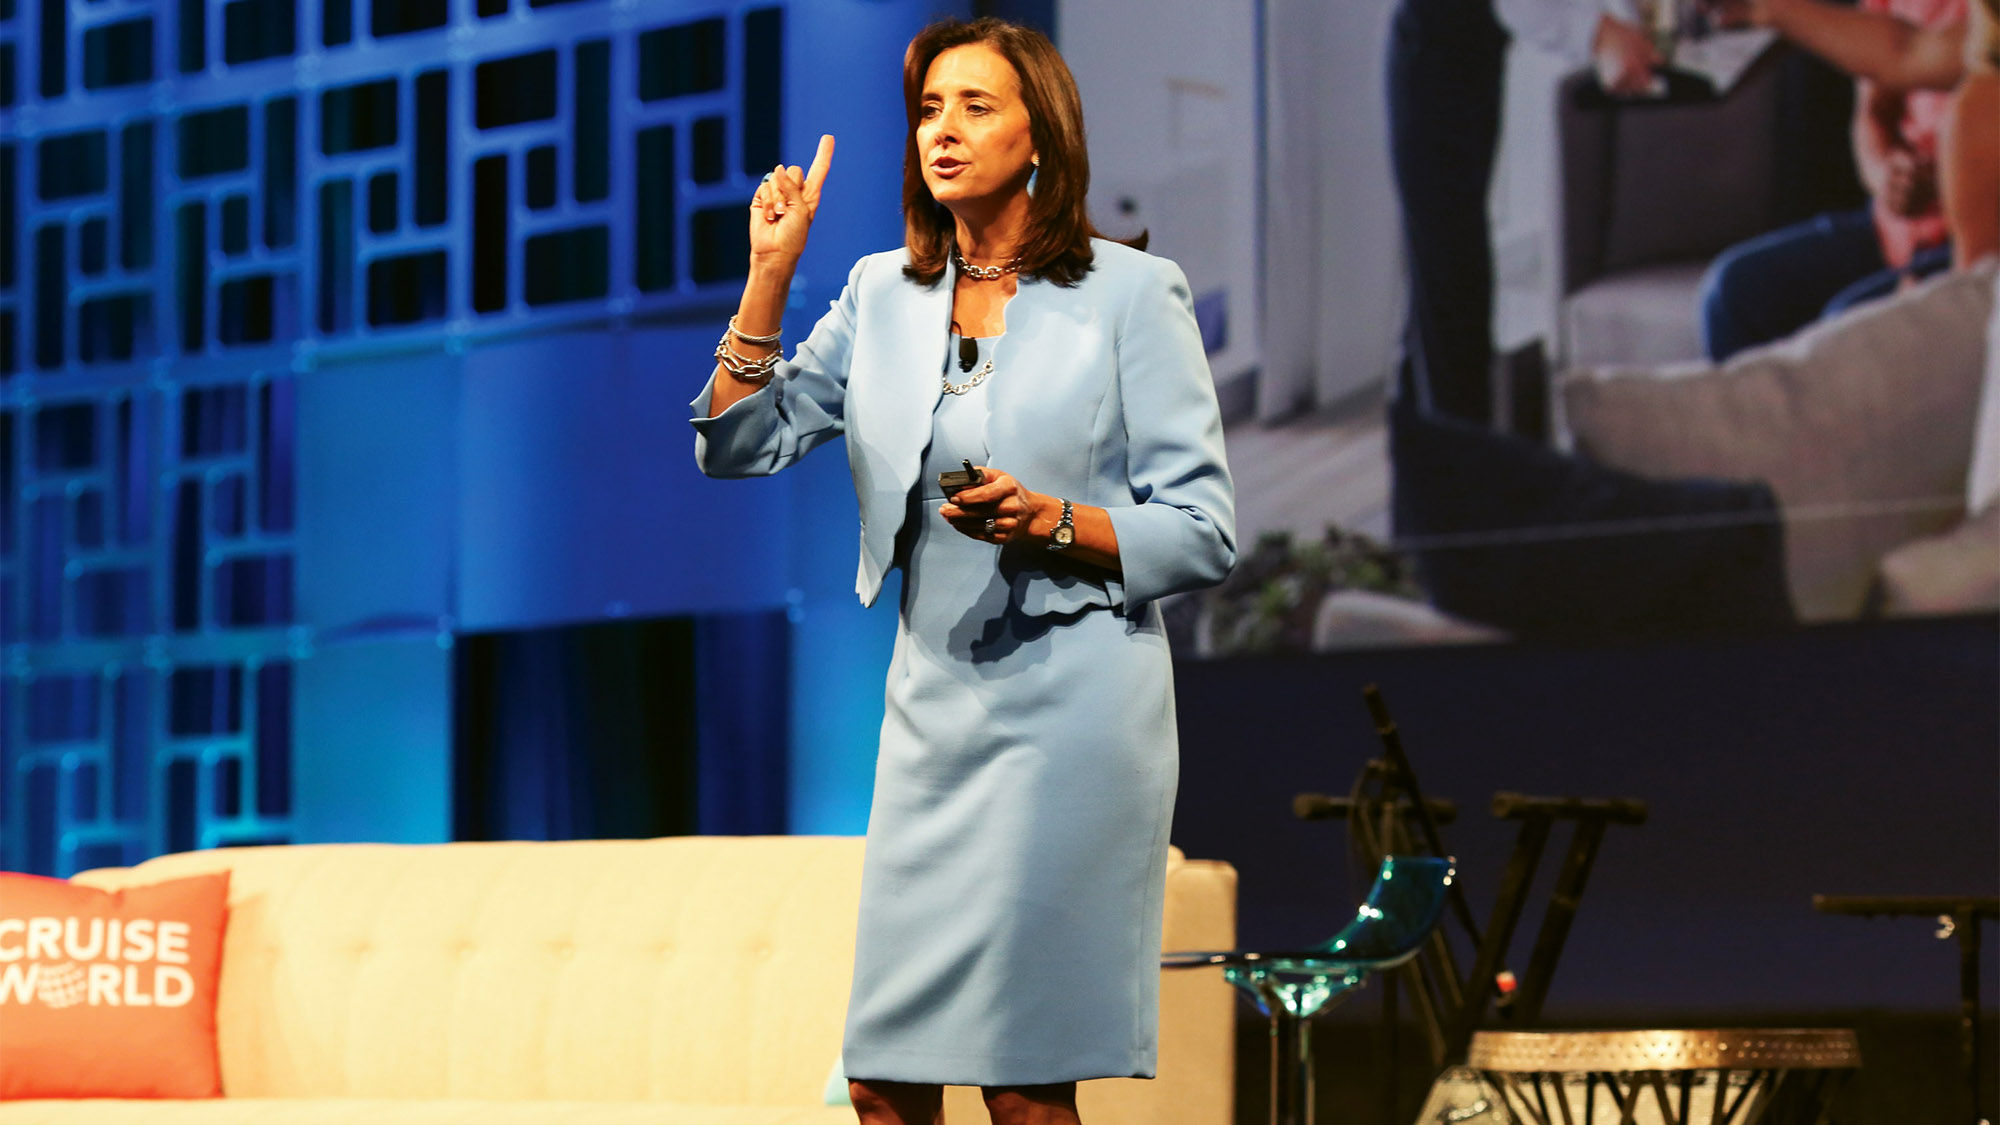 Dondra Ritzenthaler at Travel Weekly's 2019 CruiseWorld conference. Ritzenthaler was an active speaker, panelist and agent advocate.